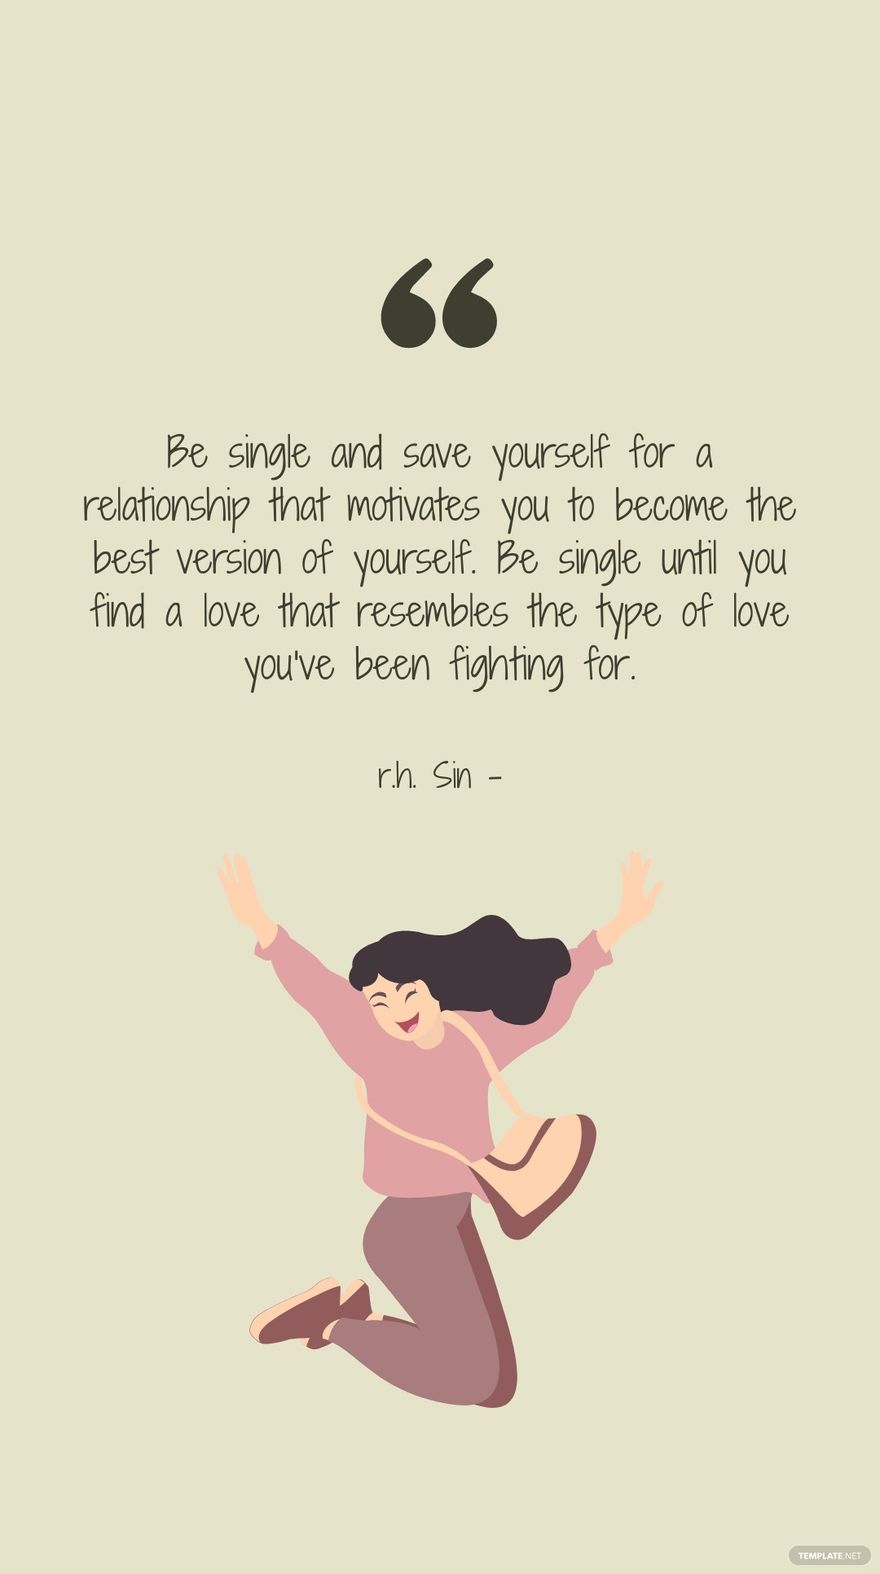 r.h. Sin - Be single and save yourself for a relationship that motivates you to become the best version of yourself. Be single until you find a love that resembles the type of love you've been fightin